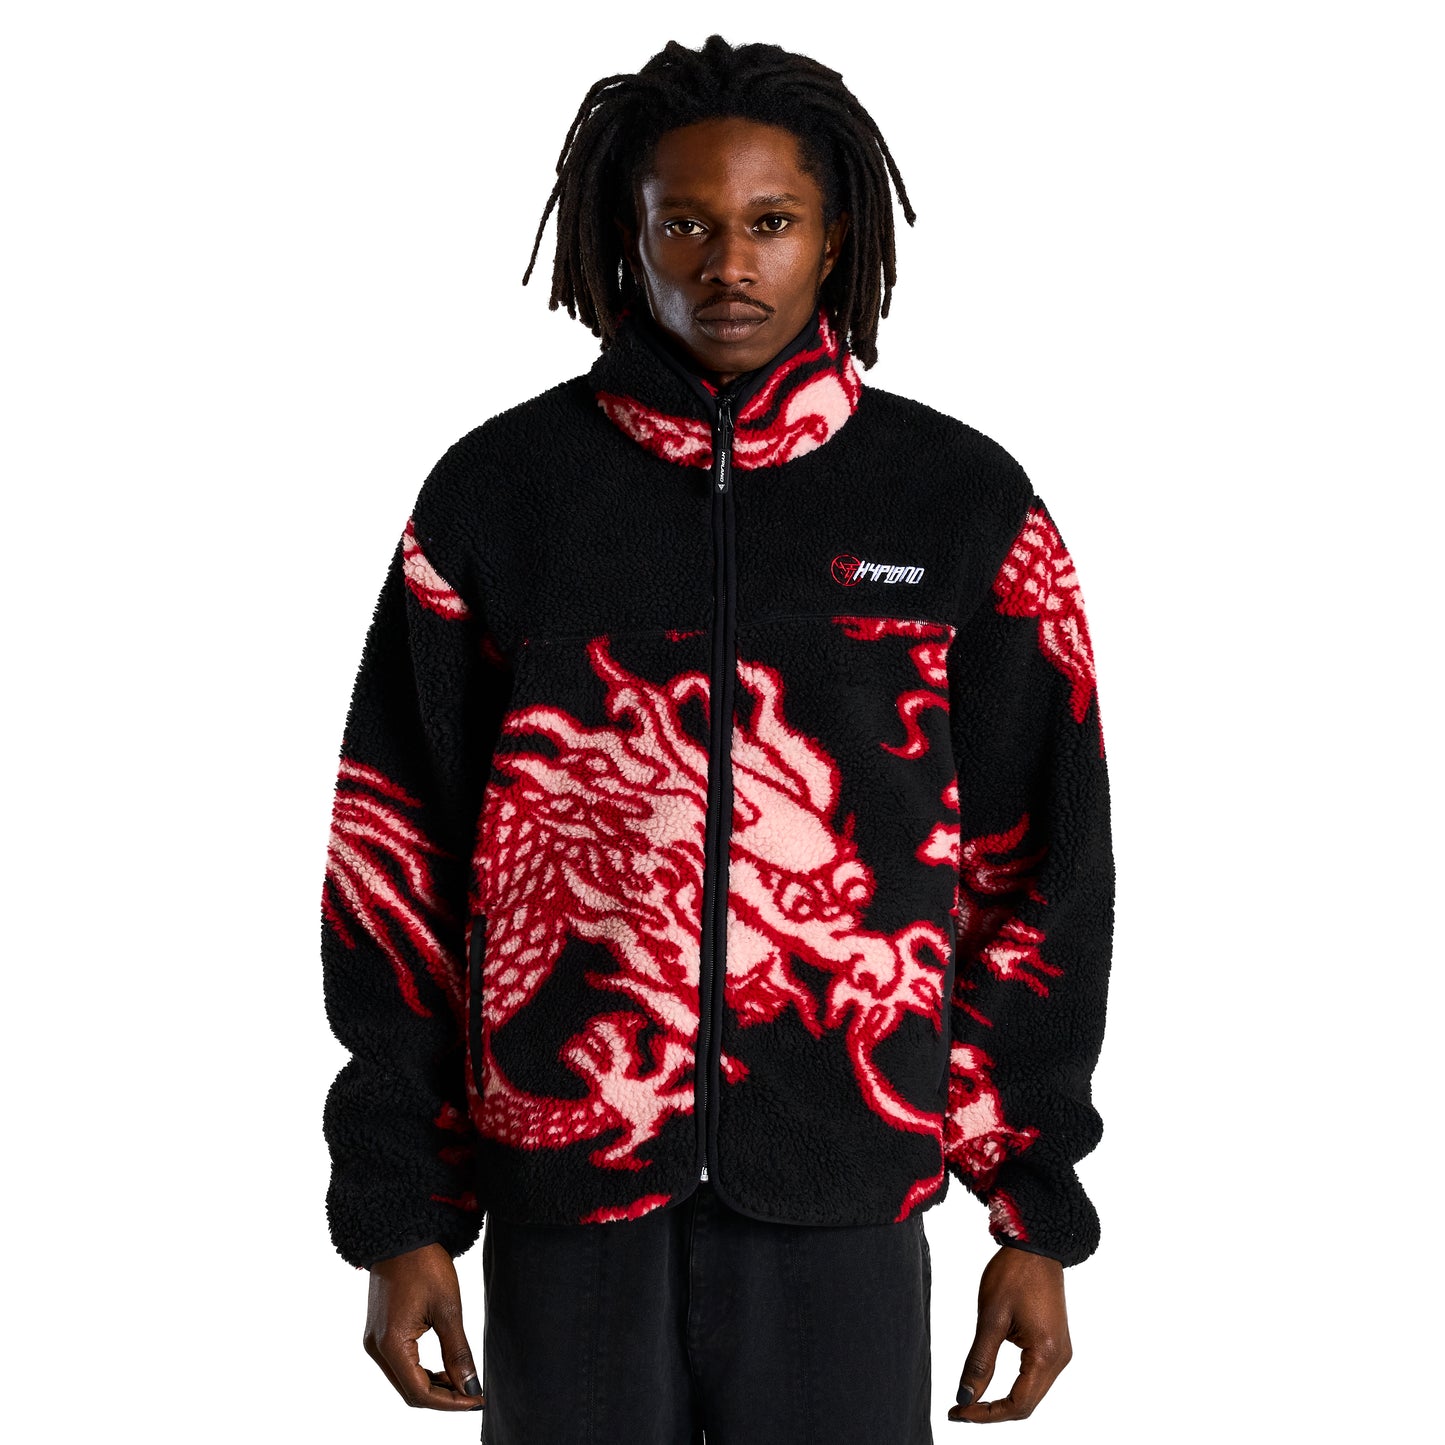 YEAR OF THE DRAGON SHERPA JACKET (BLACK)